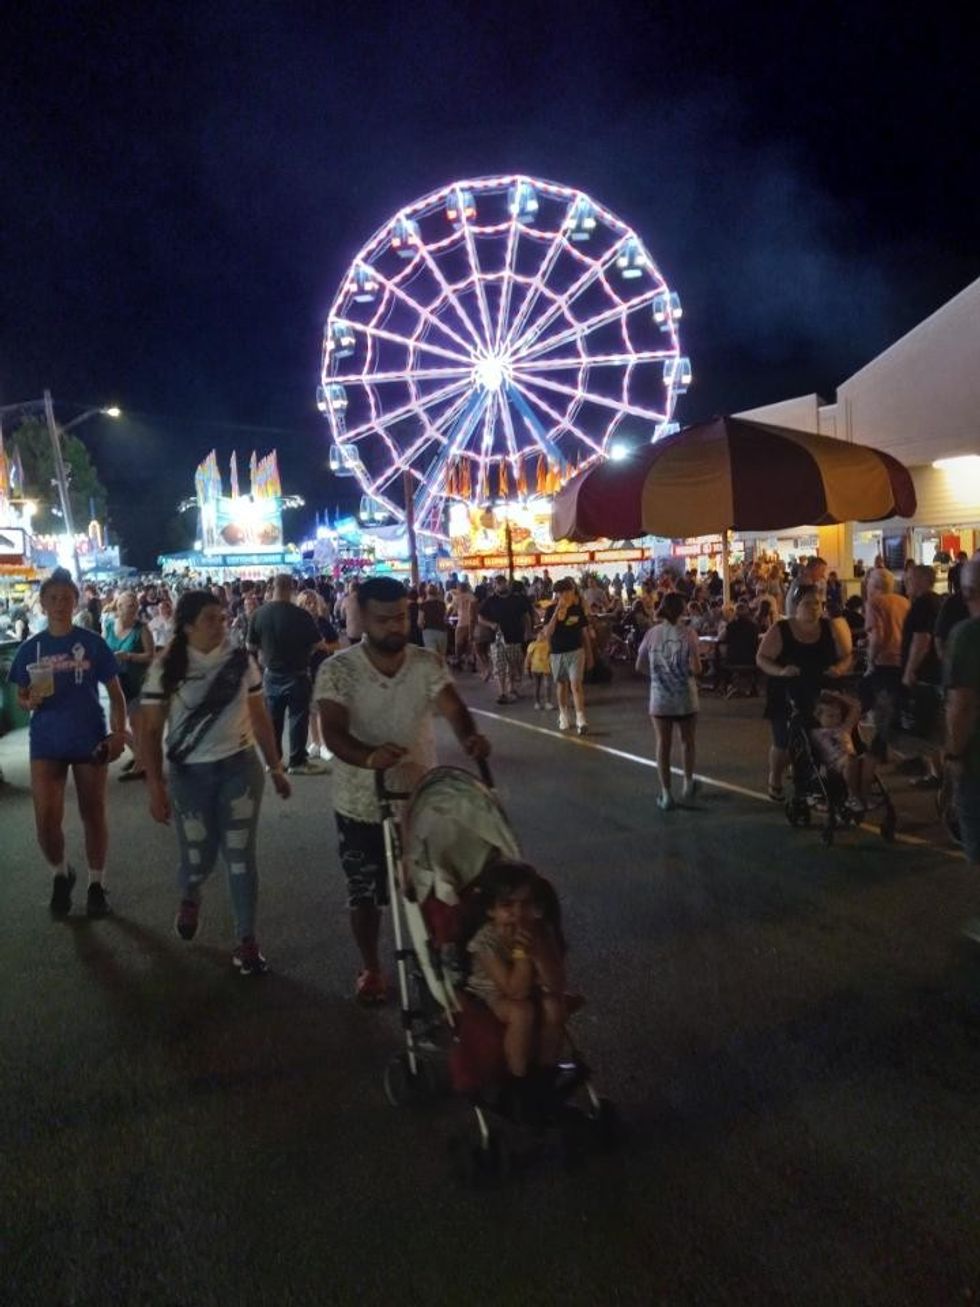 The sights, sounds and tastes of Dutchess County celebrated at fair